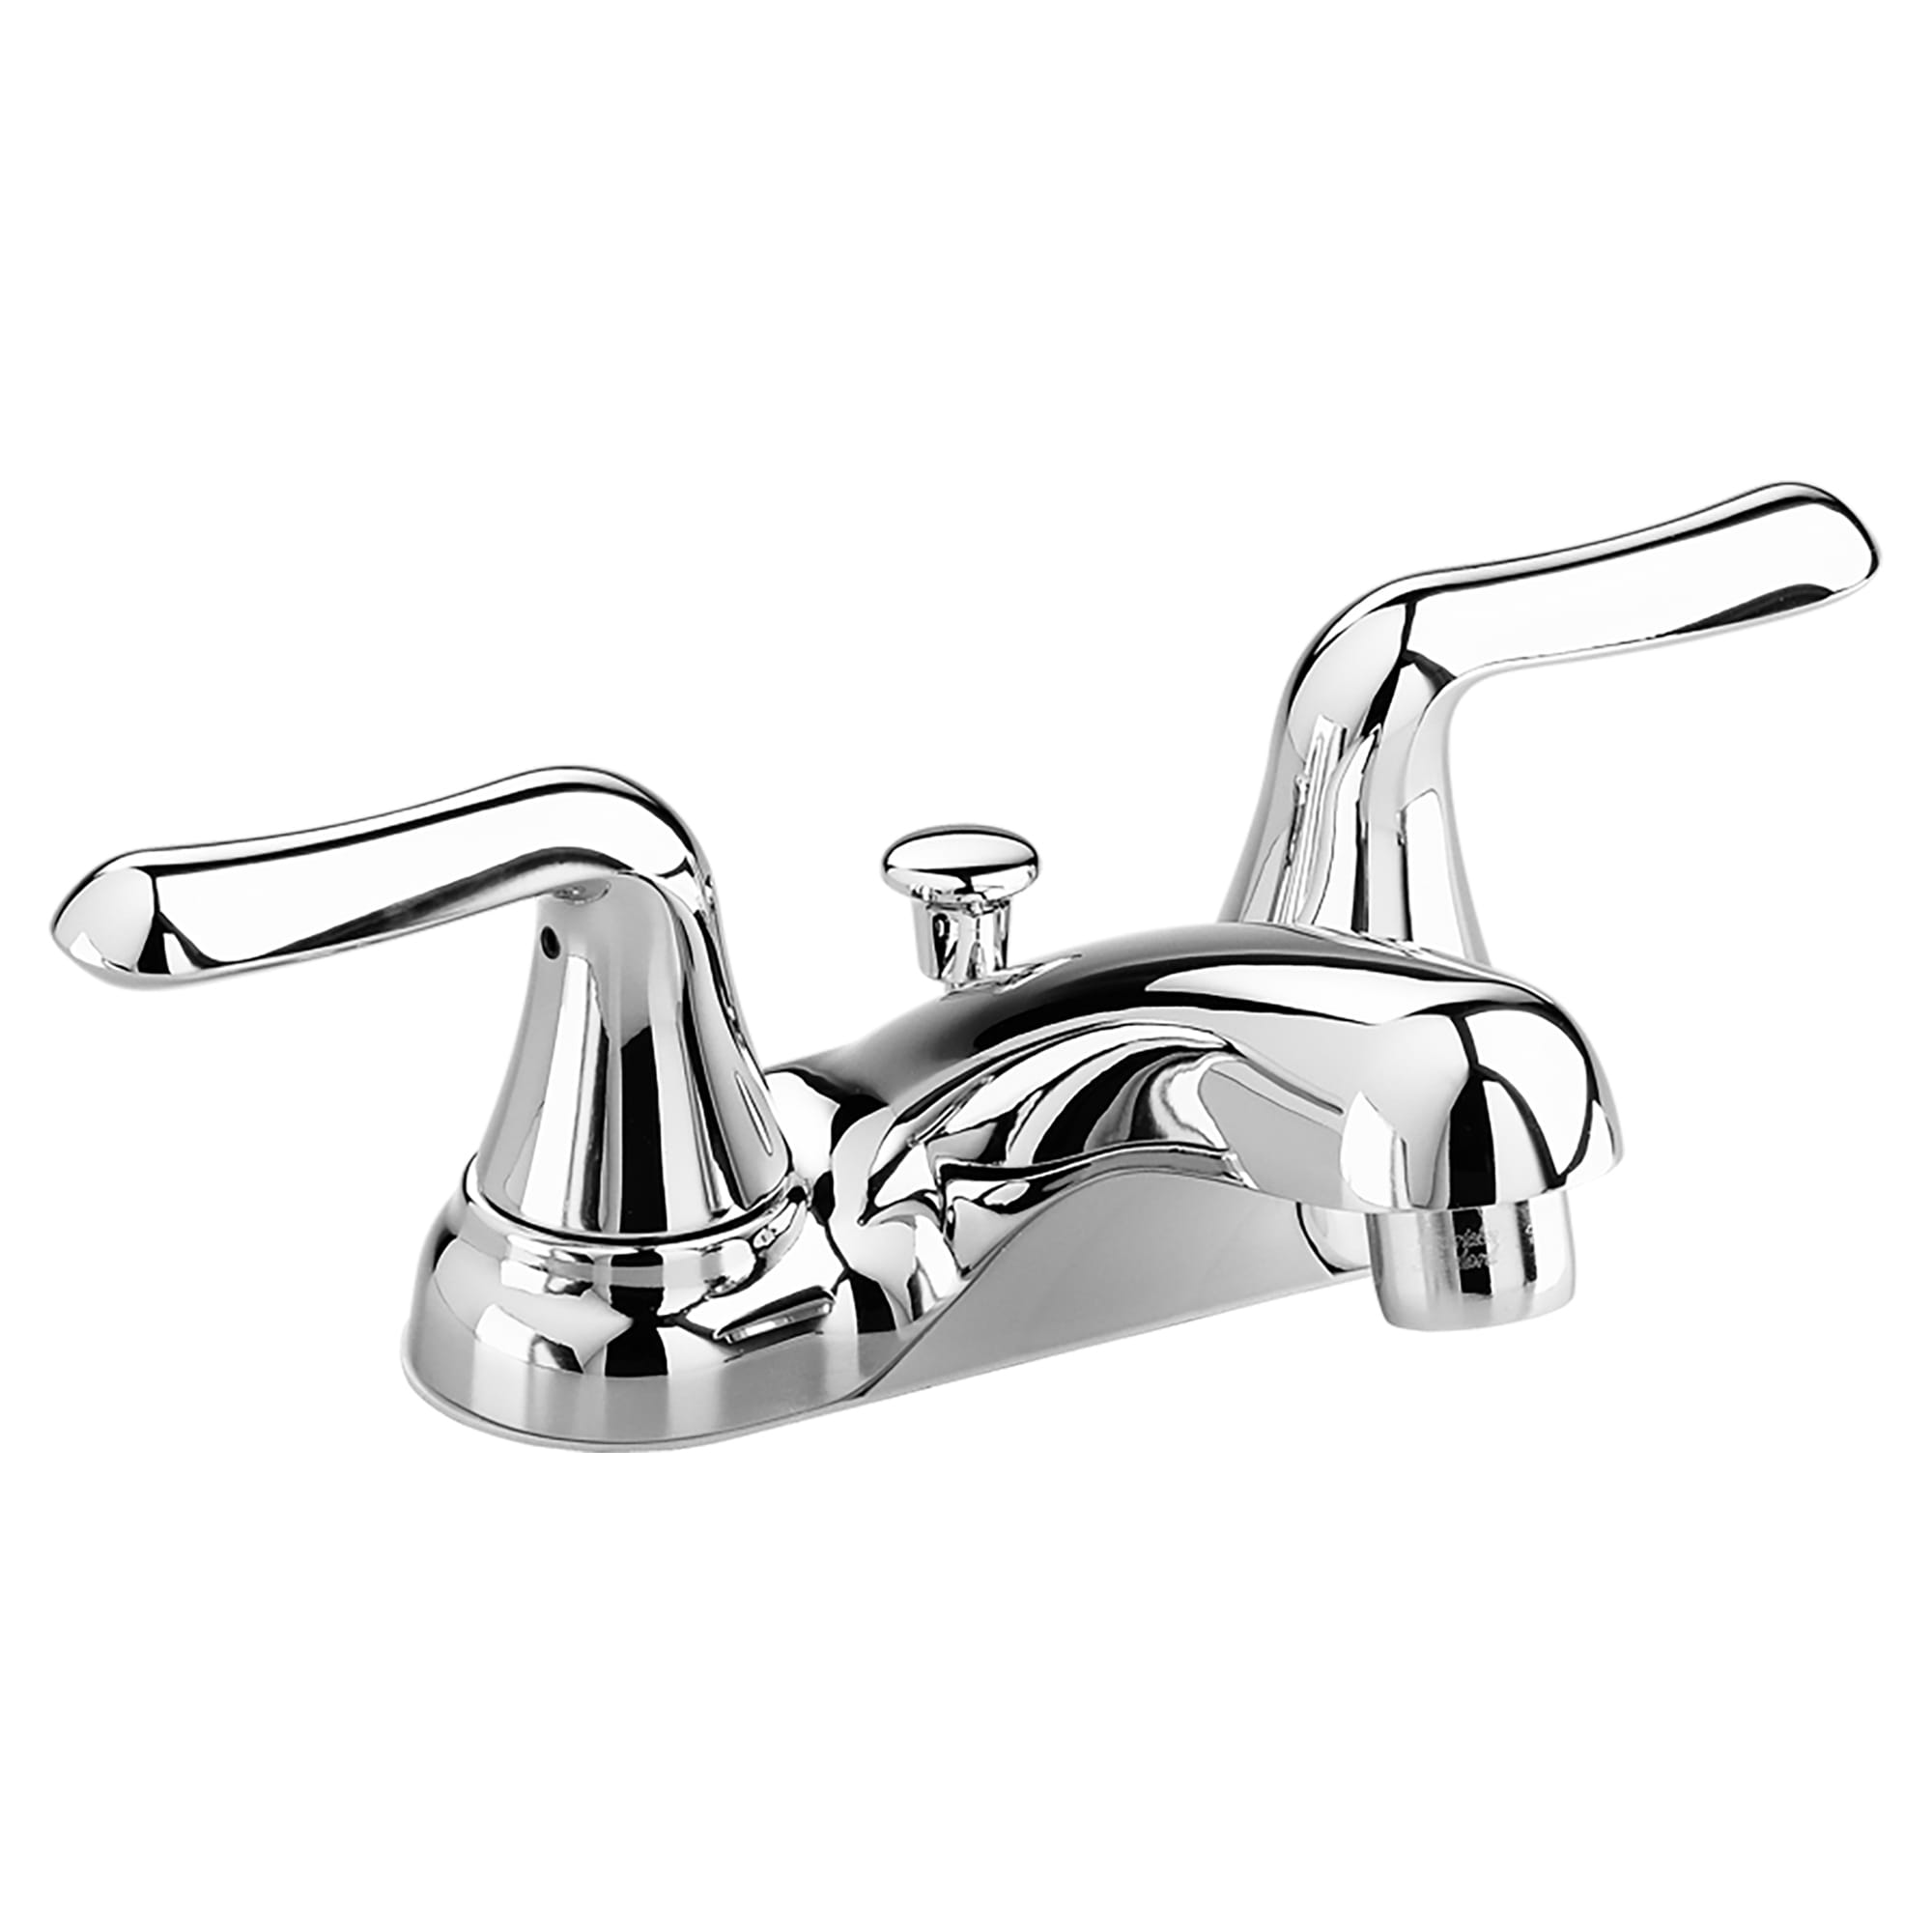 Colony Soft 4 Inch Centerset 2 Handle Bathroom Faucet 12 gpm 45 L min With Lever Handles CHROME